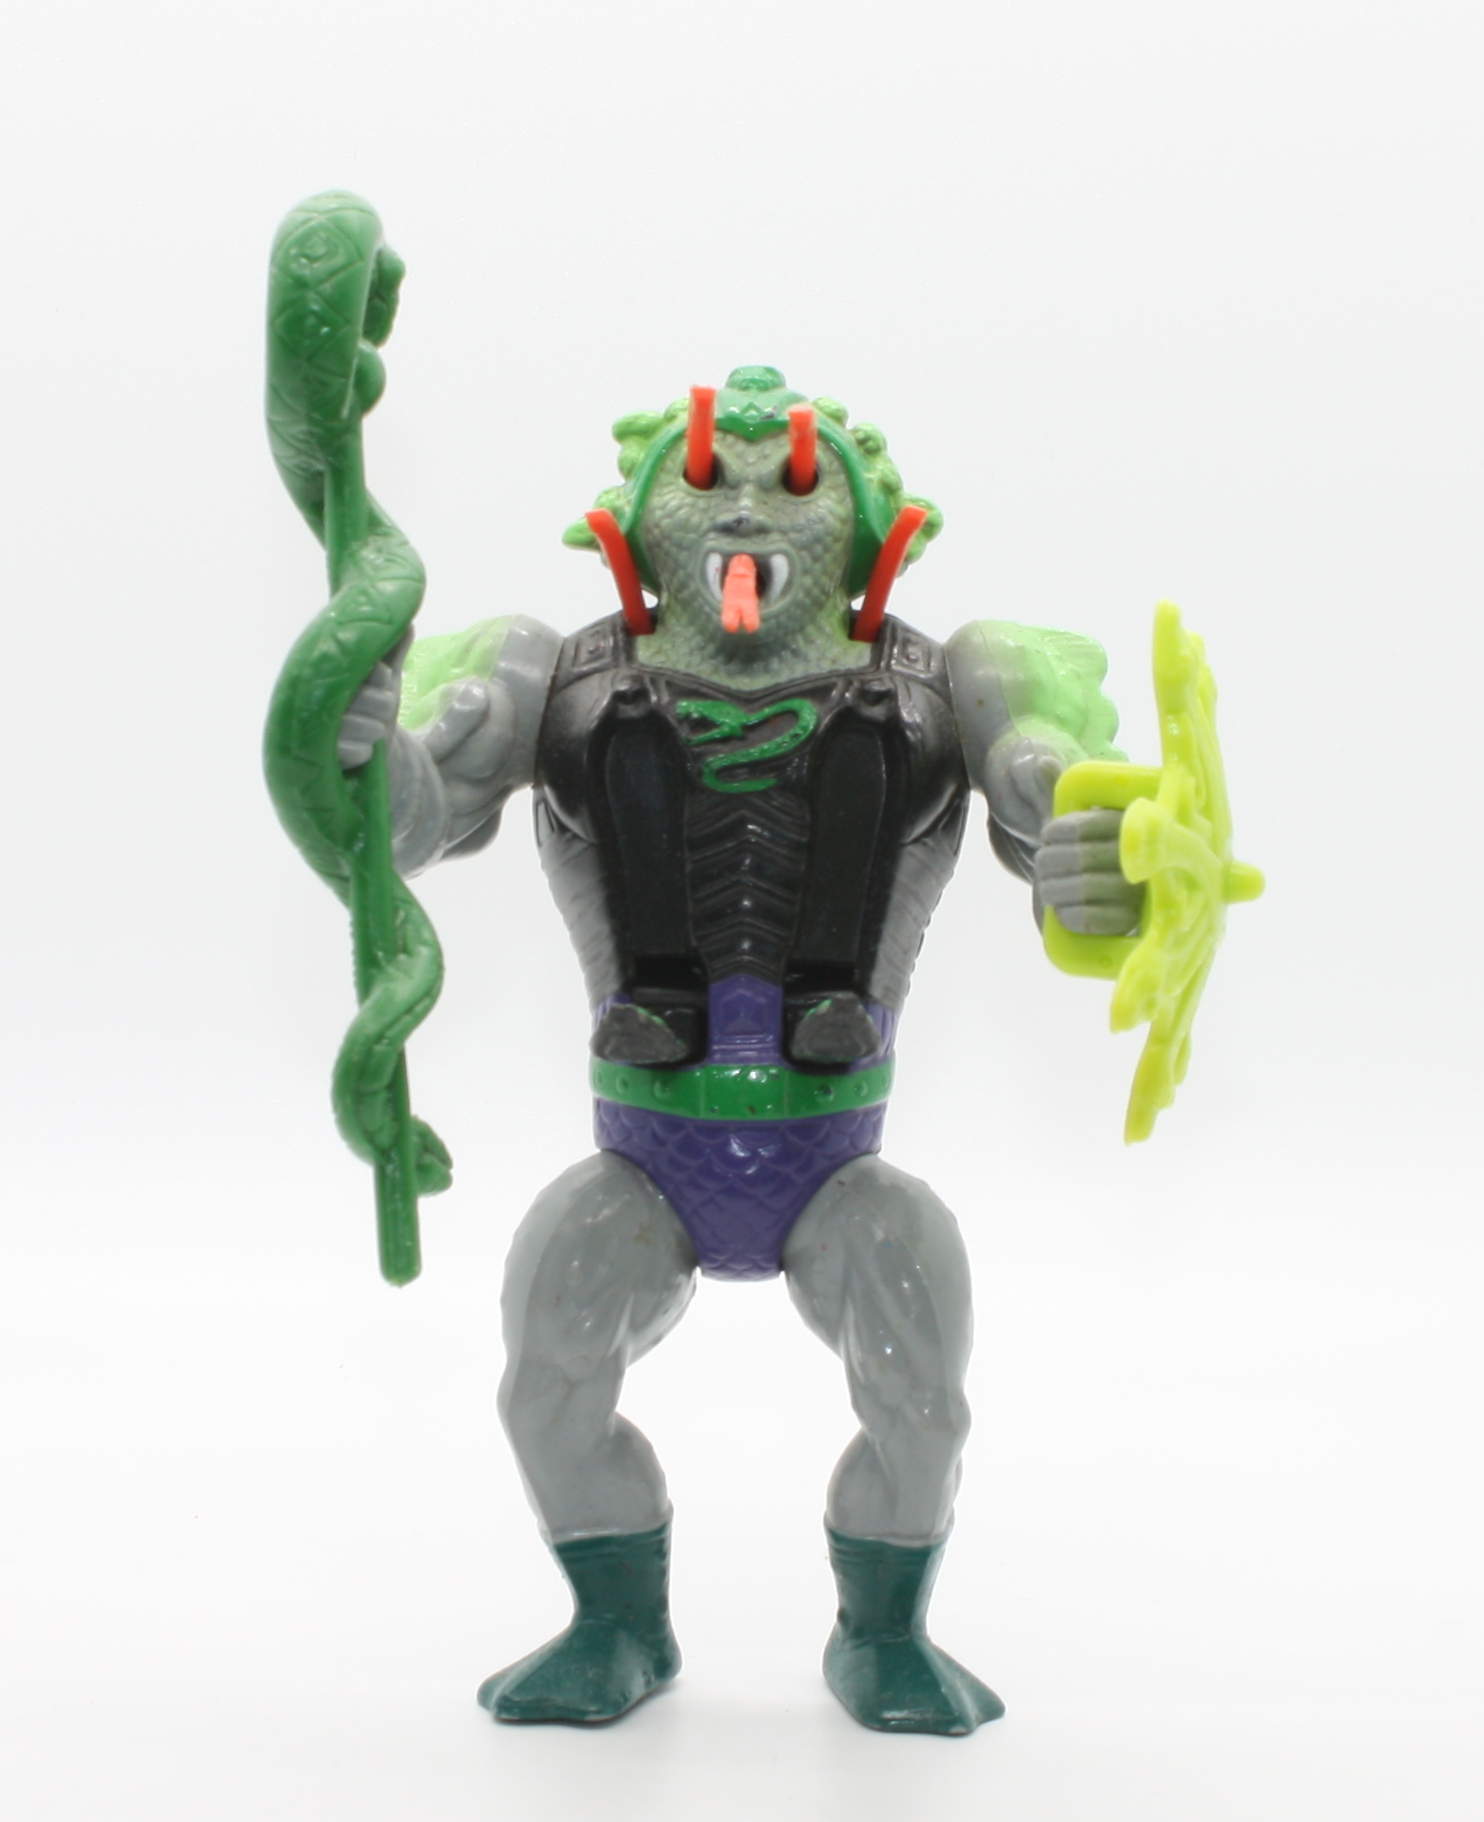 The Top 10 Creepiest Masters of the Universe Figures | Battle Ram